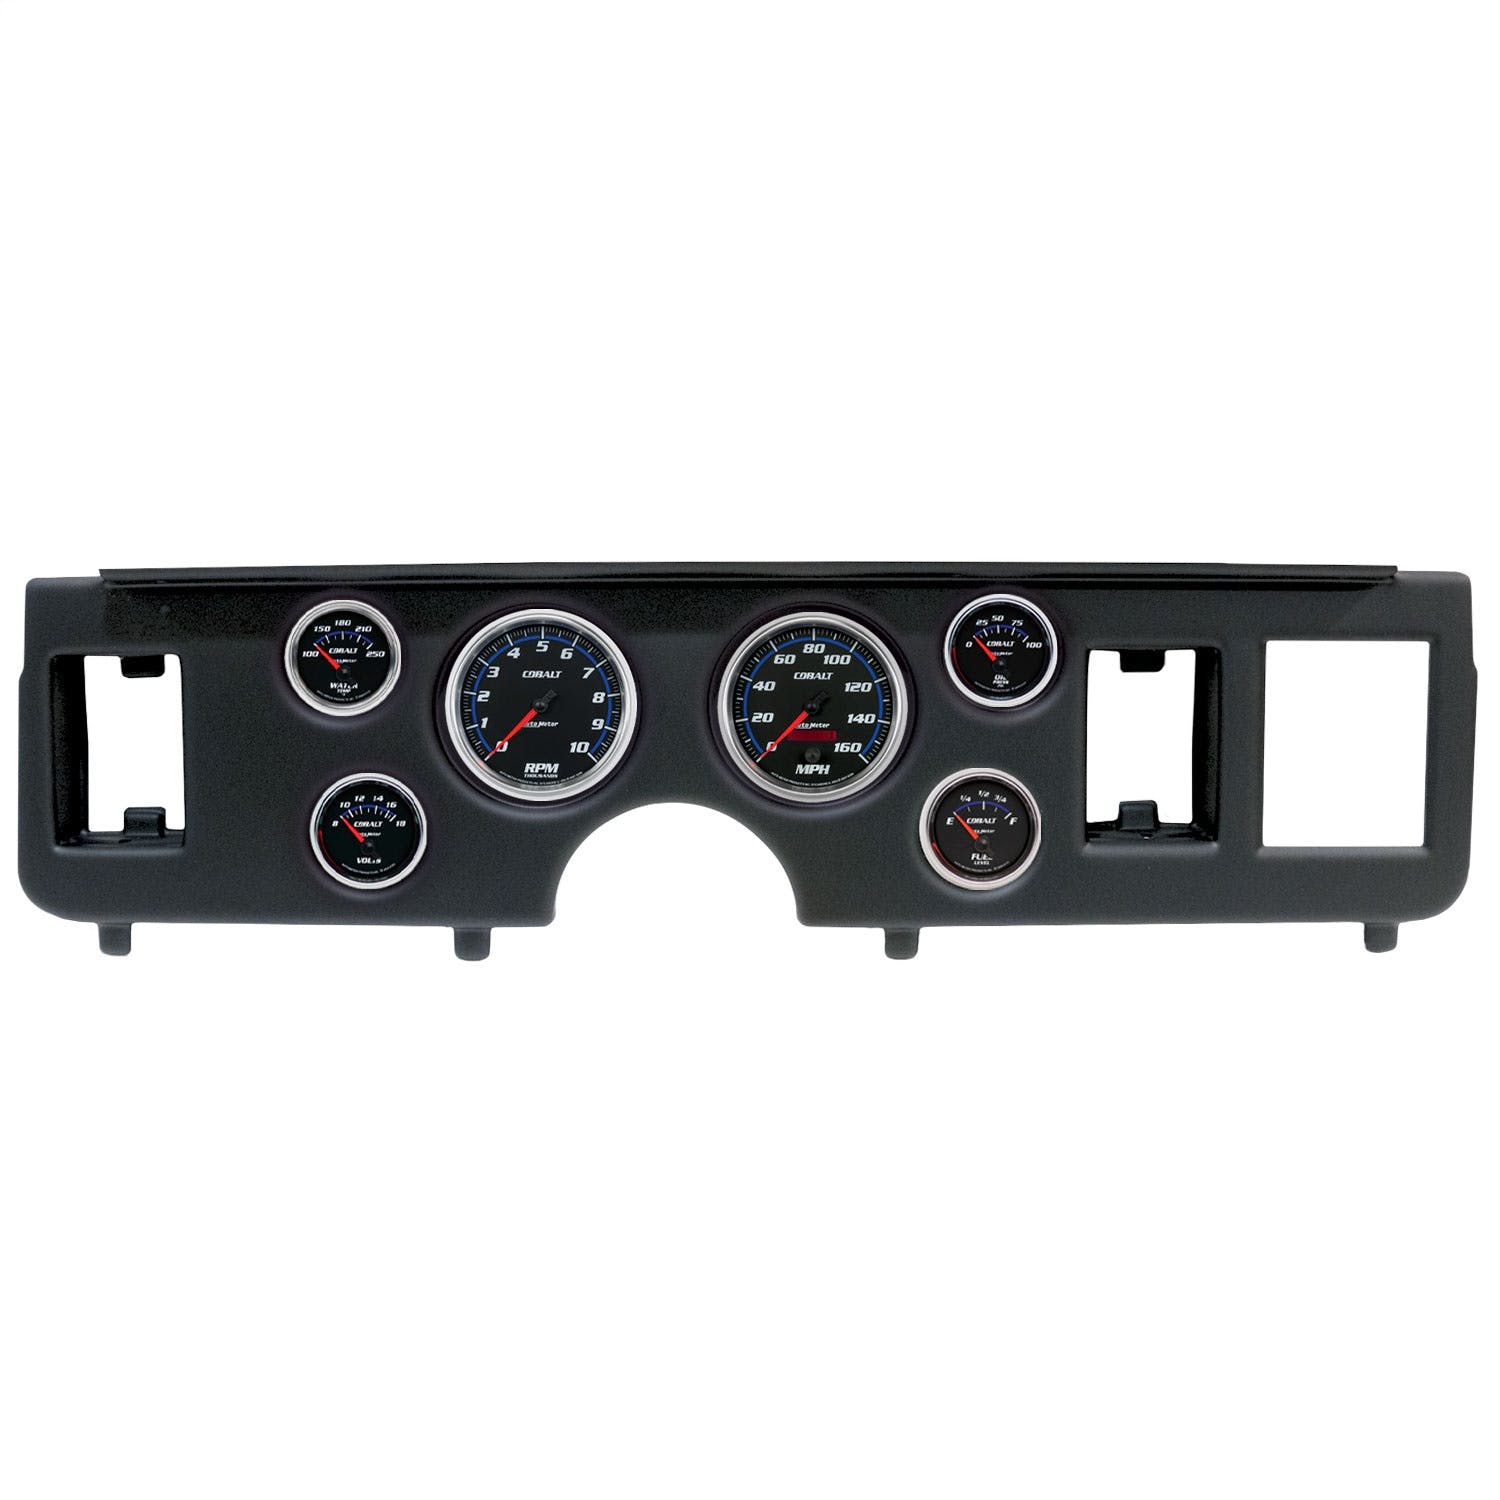 AutoMeter Products 2917-05 6 Gauge Direct-Fit Dash Kit, Ford Mustang 79-86, Cobalt